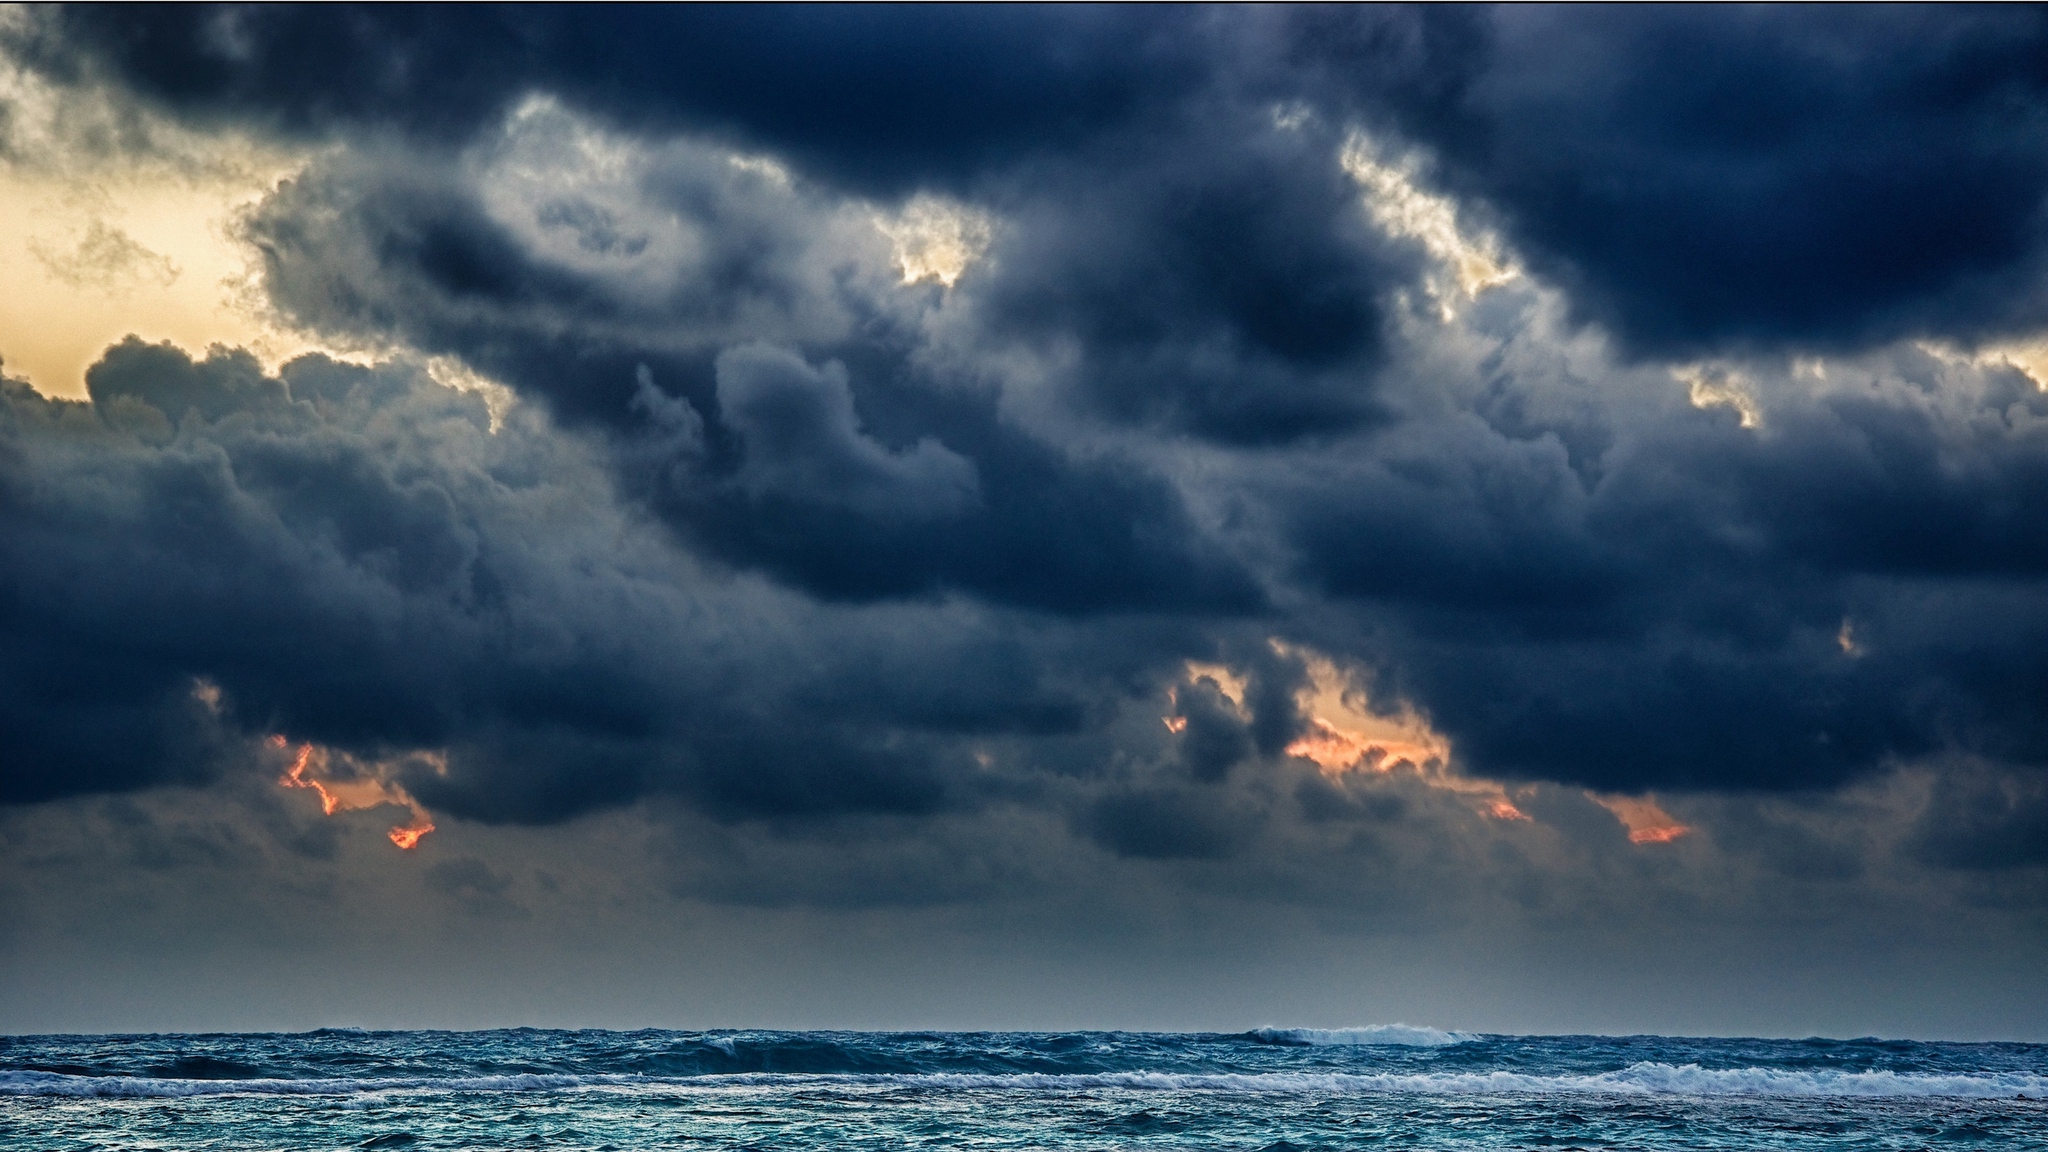 Wallpaper Clouds, Sea, Storm, Gloomy, Heavy, Elements - Stormy Clouds Over Sea - HD Wallpaper 